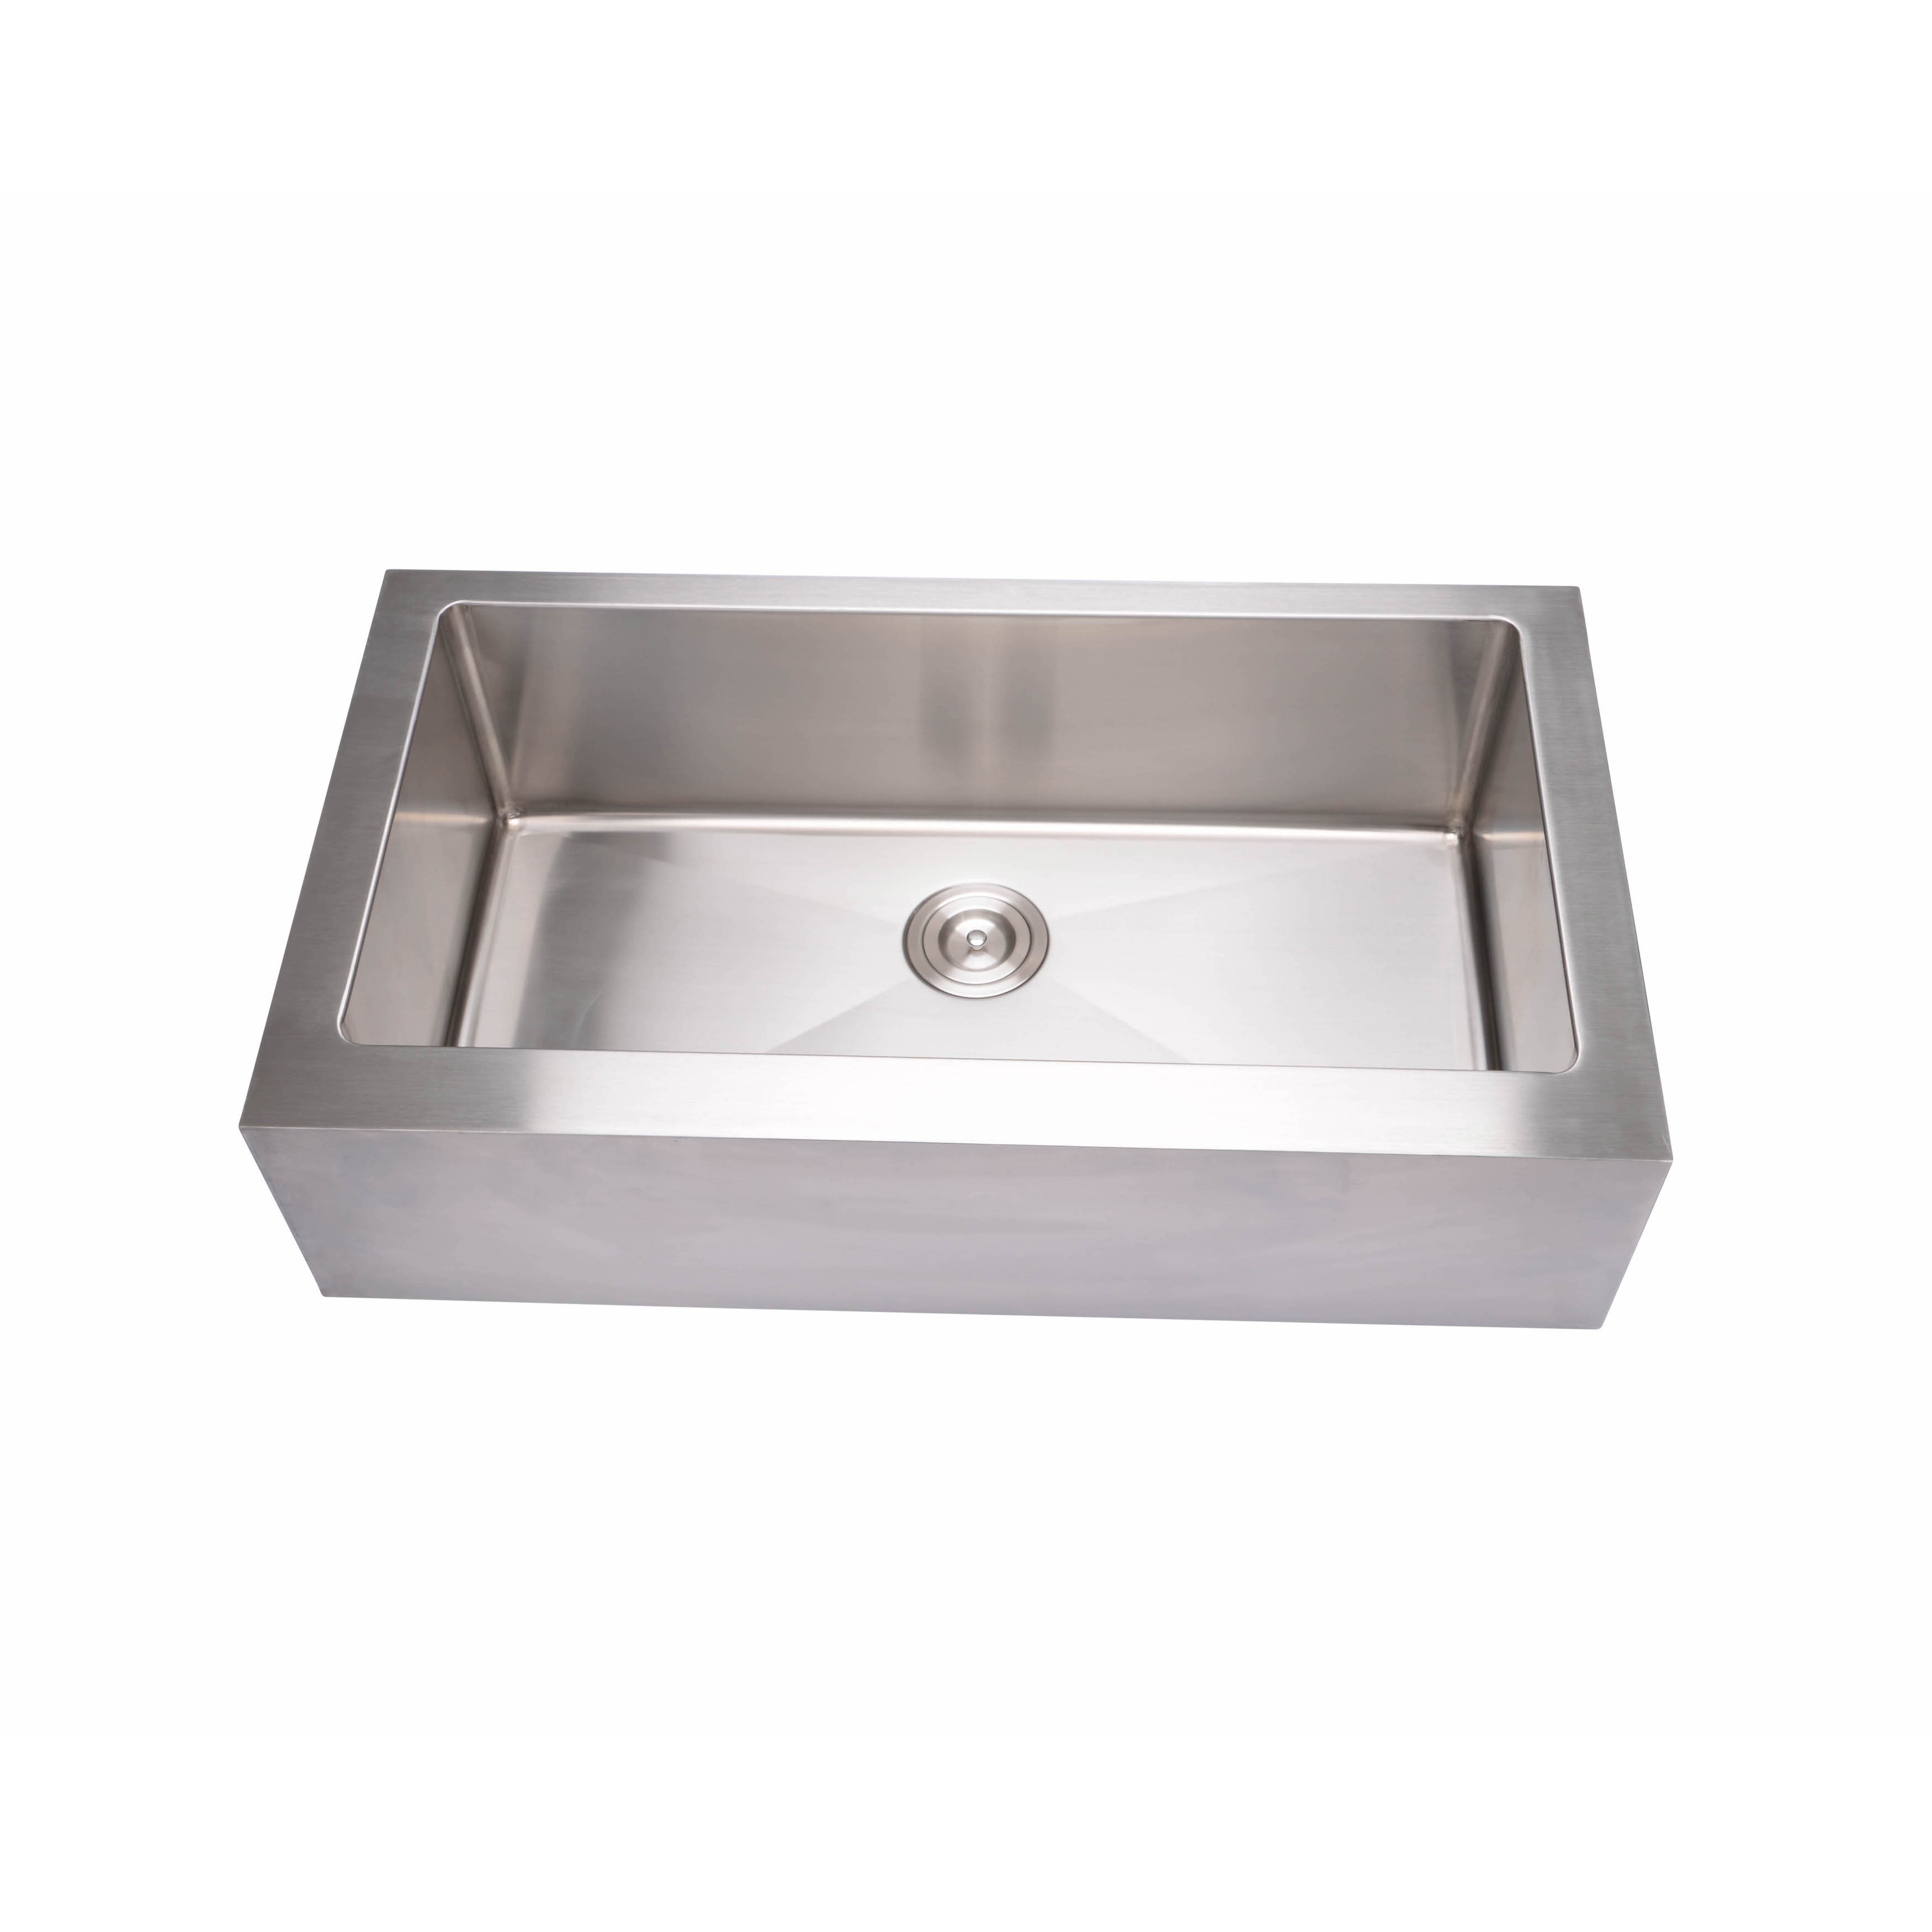 Shop Black Friday Deals On Hahn Flat Apron Farmhouse Extra Large Single Bowl Sink Silver Overstock 12033190